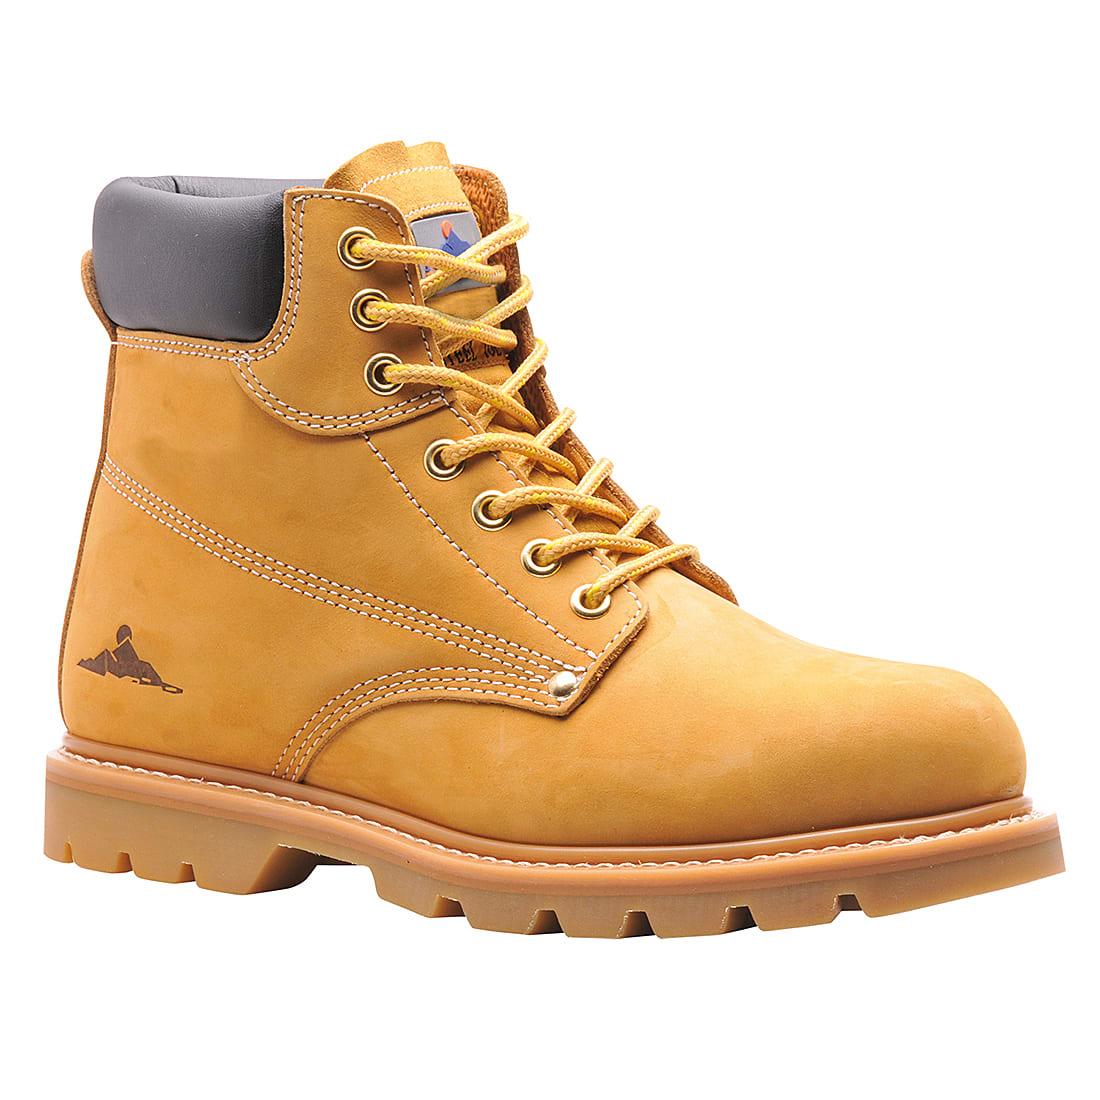 Portwest Steelite Welted Safety Boots SB HRO in Honey (Product Code: FW17)